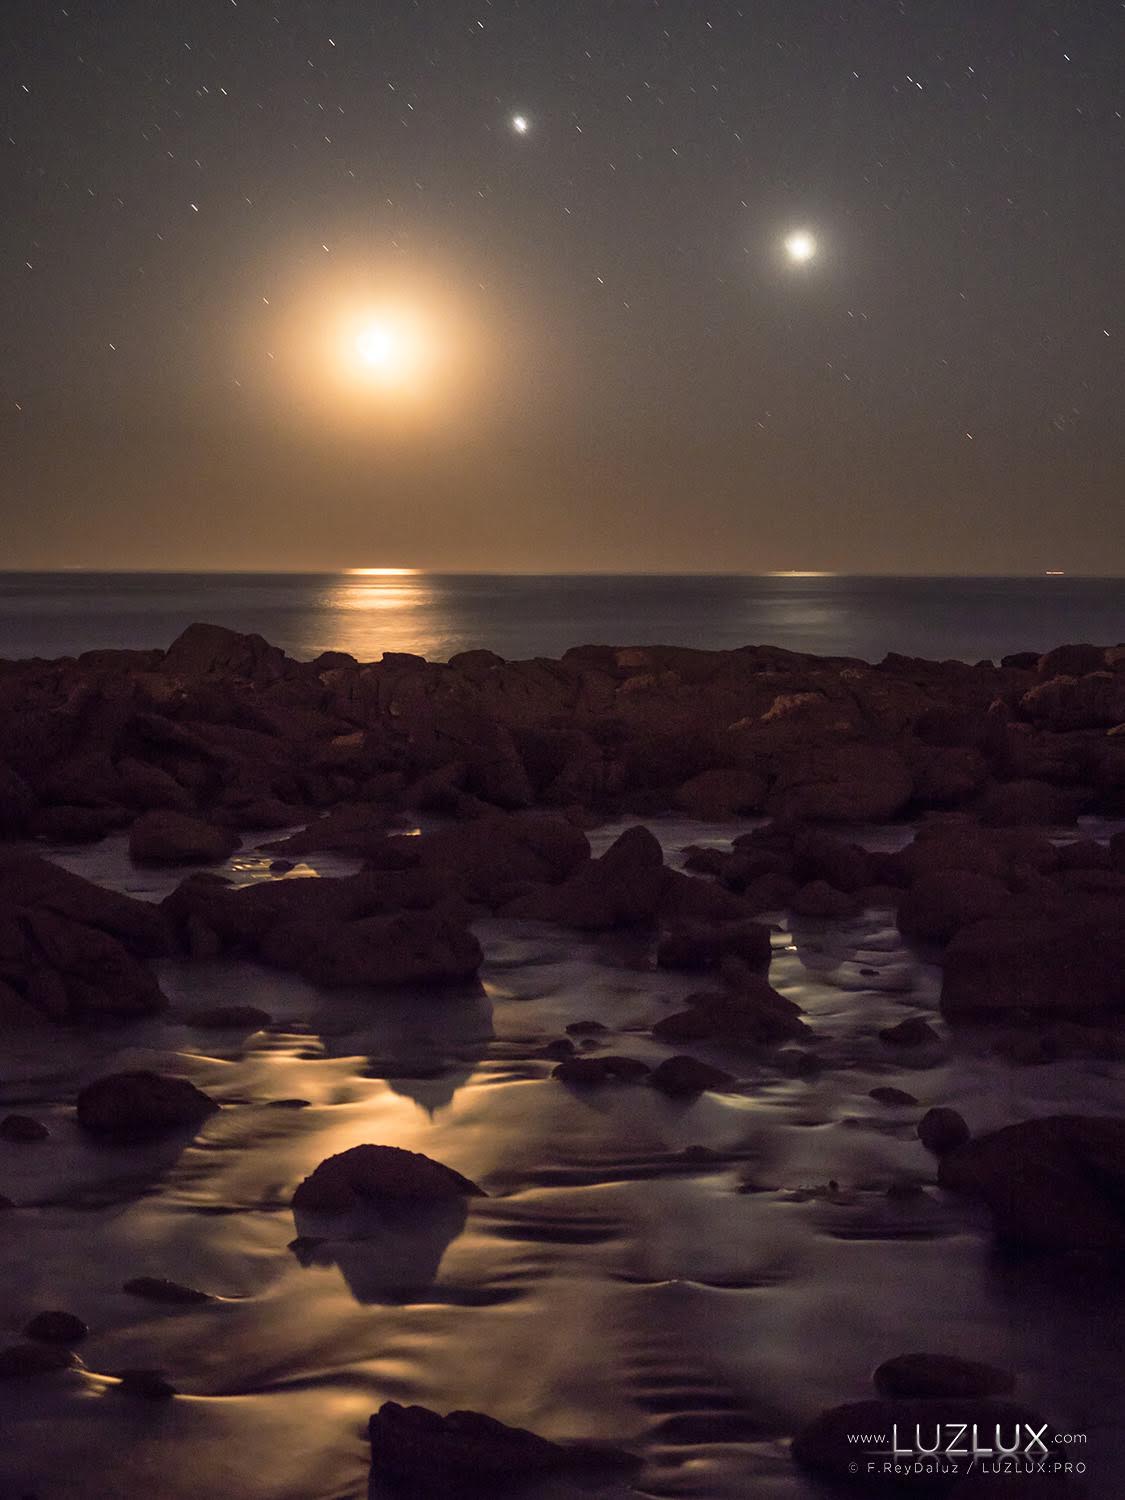 Triple Conjunction Over Galician National Park